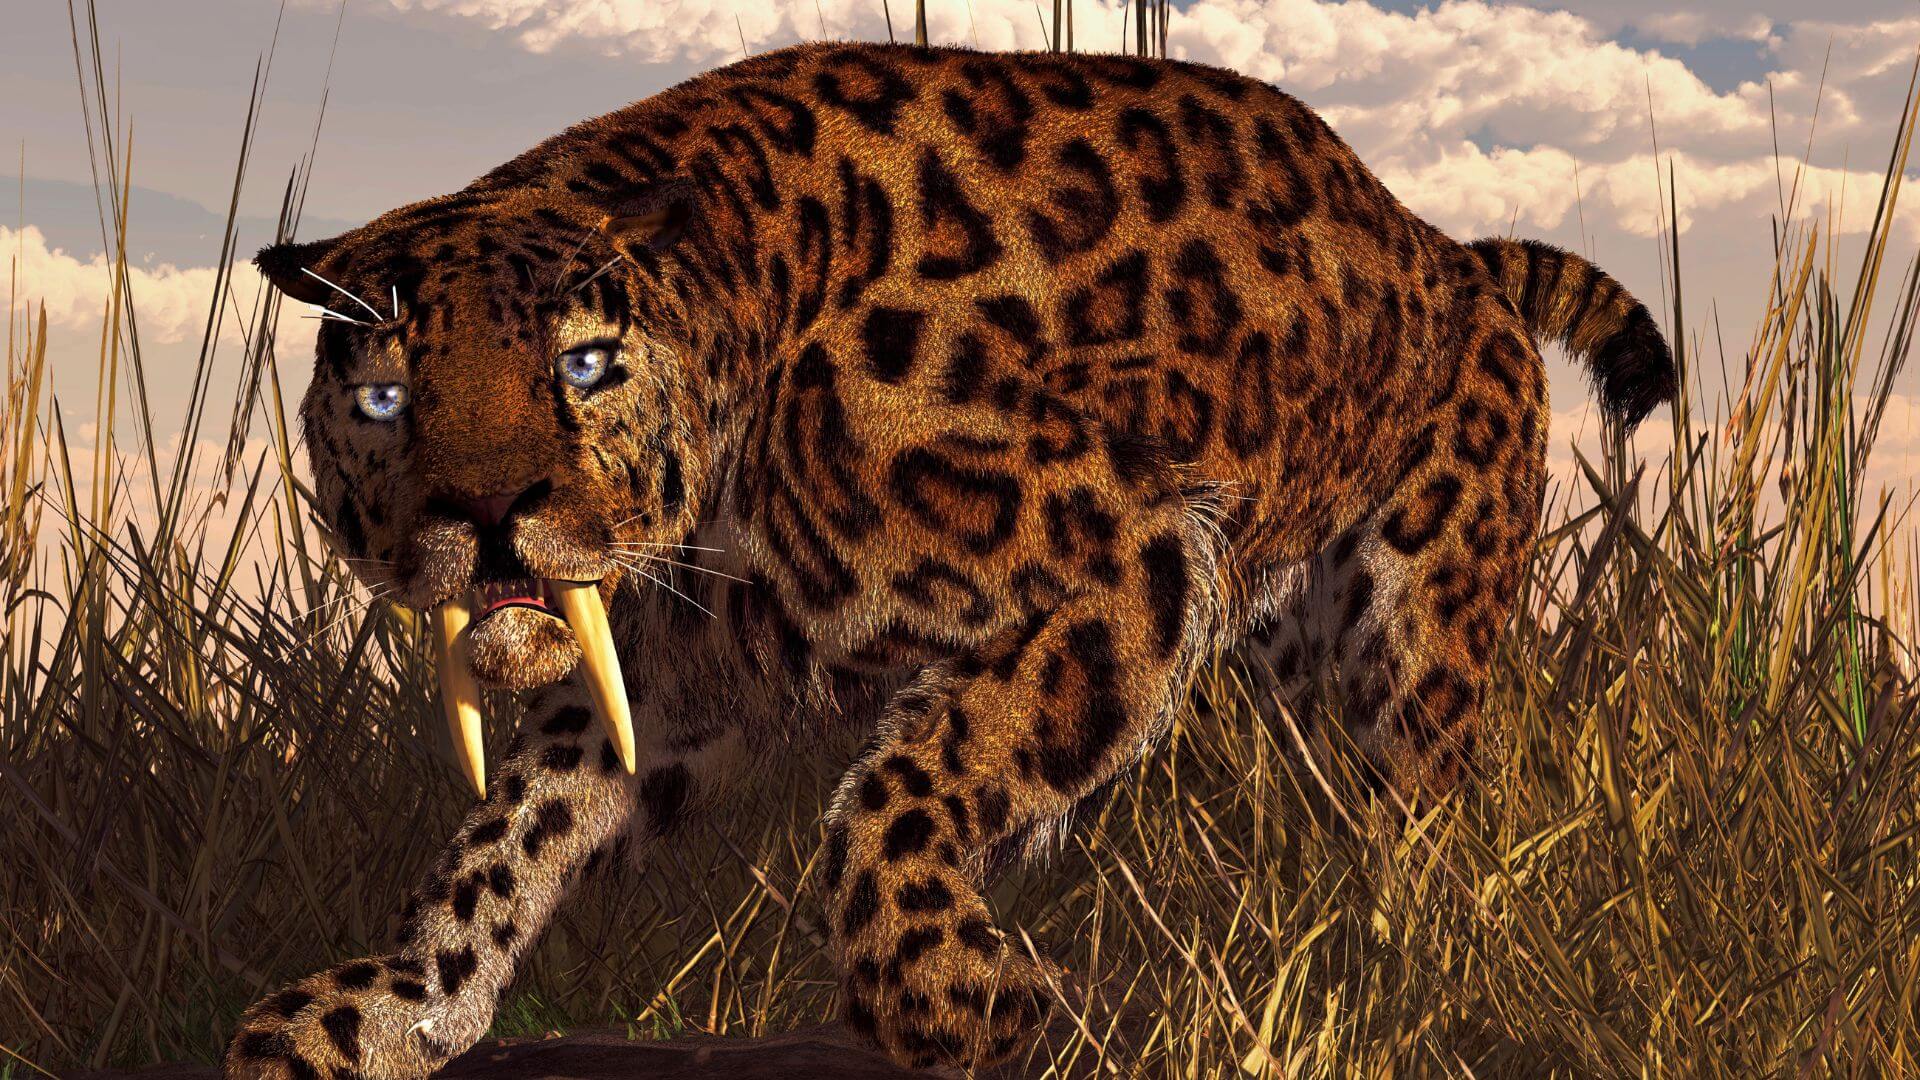 This Saber-Toothed Cat Was The First Hypercarnivore (1)